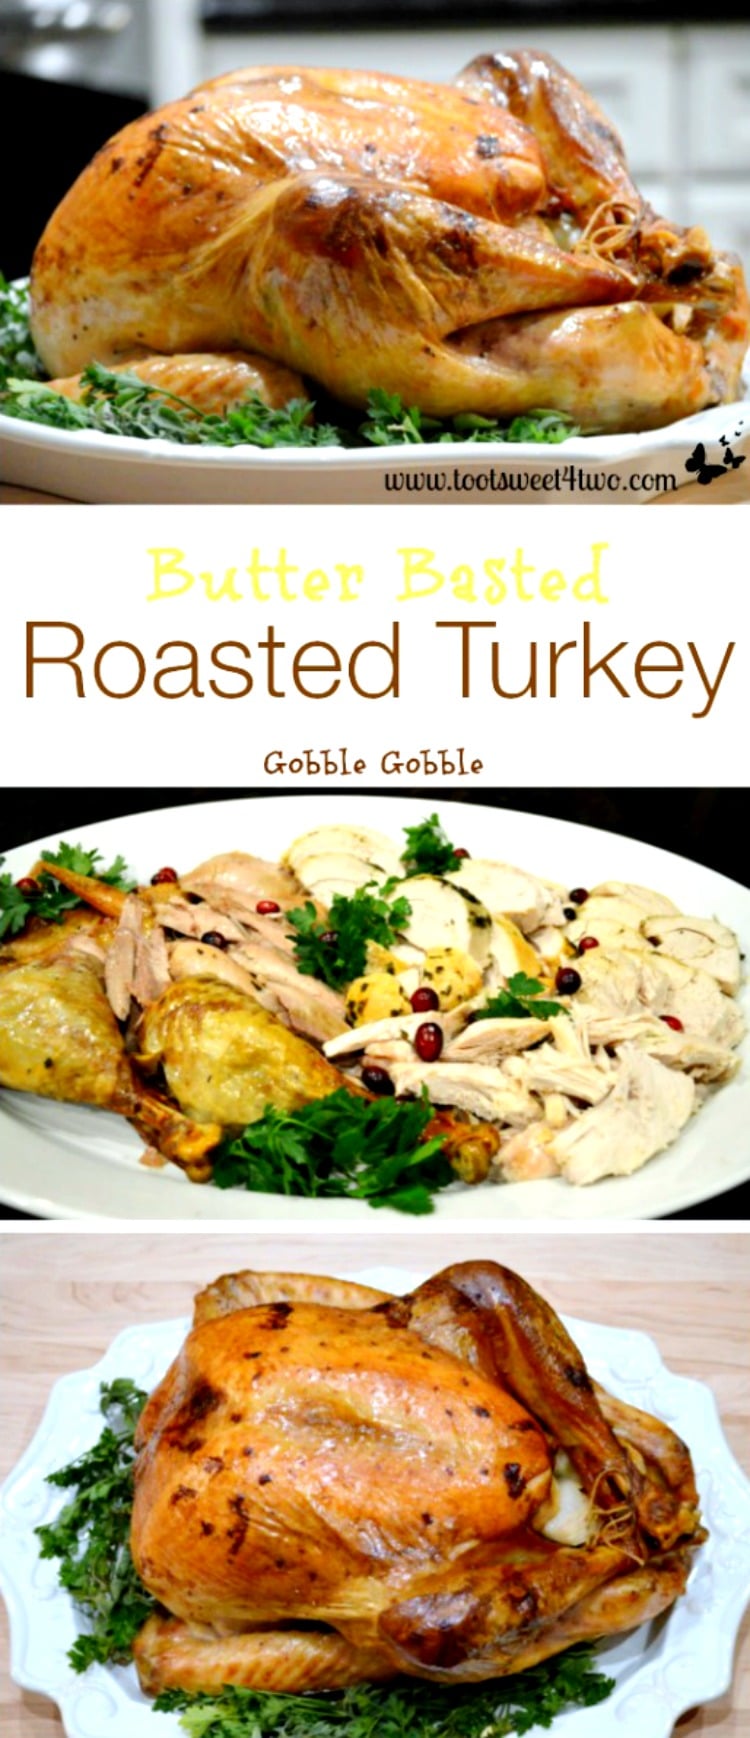 Thanksgiving Entree - Butter Basted Roasted Turkey